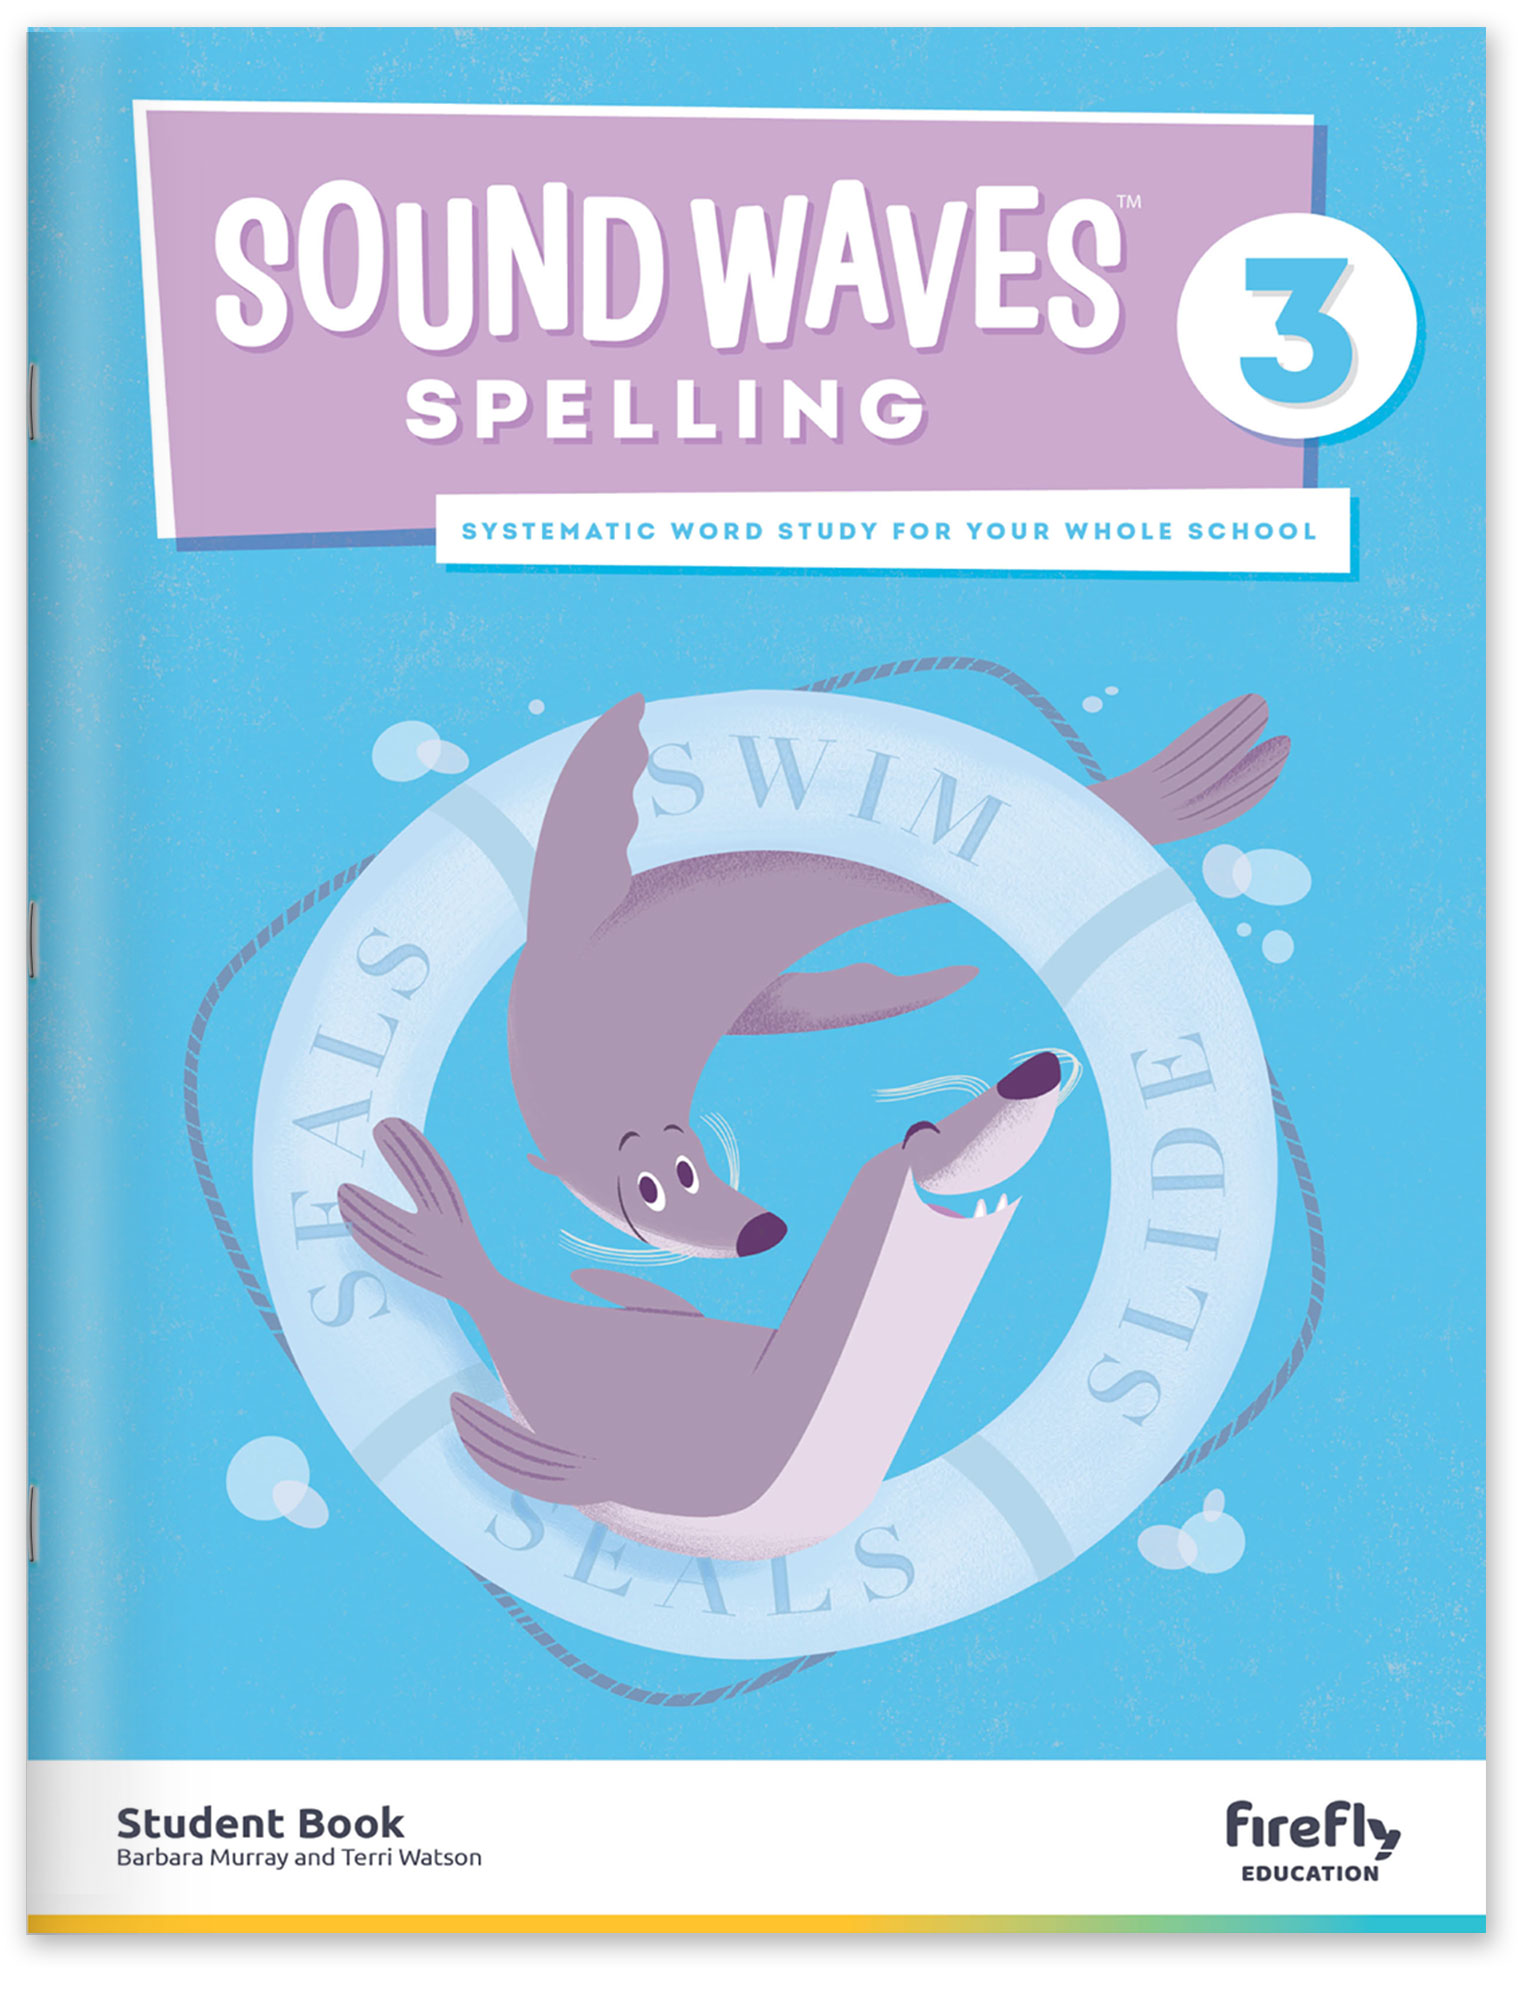 Book　Spelling　Student　Education　Firefly　–　Waves　Sound　Store